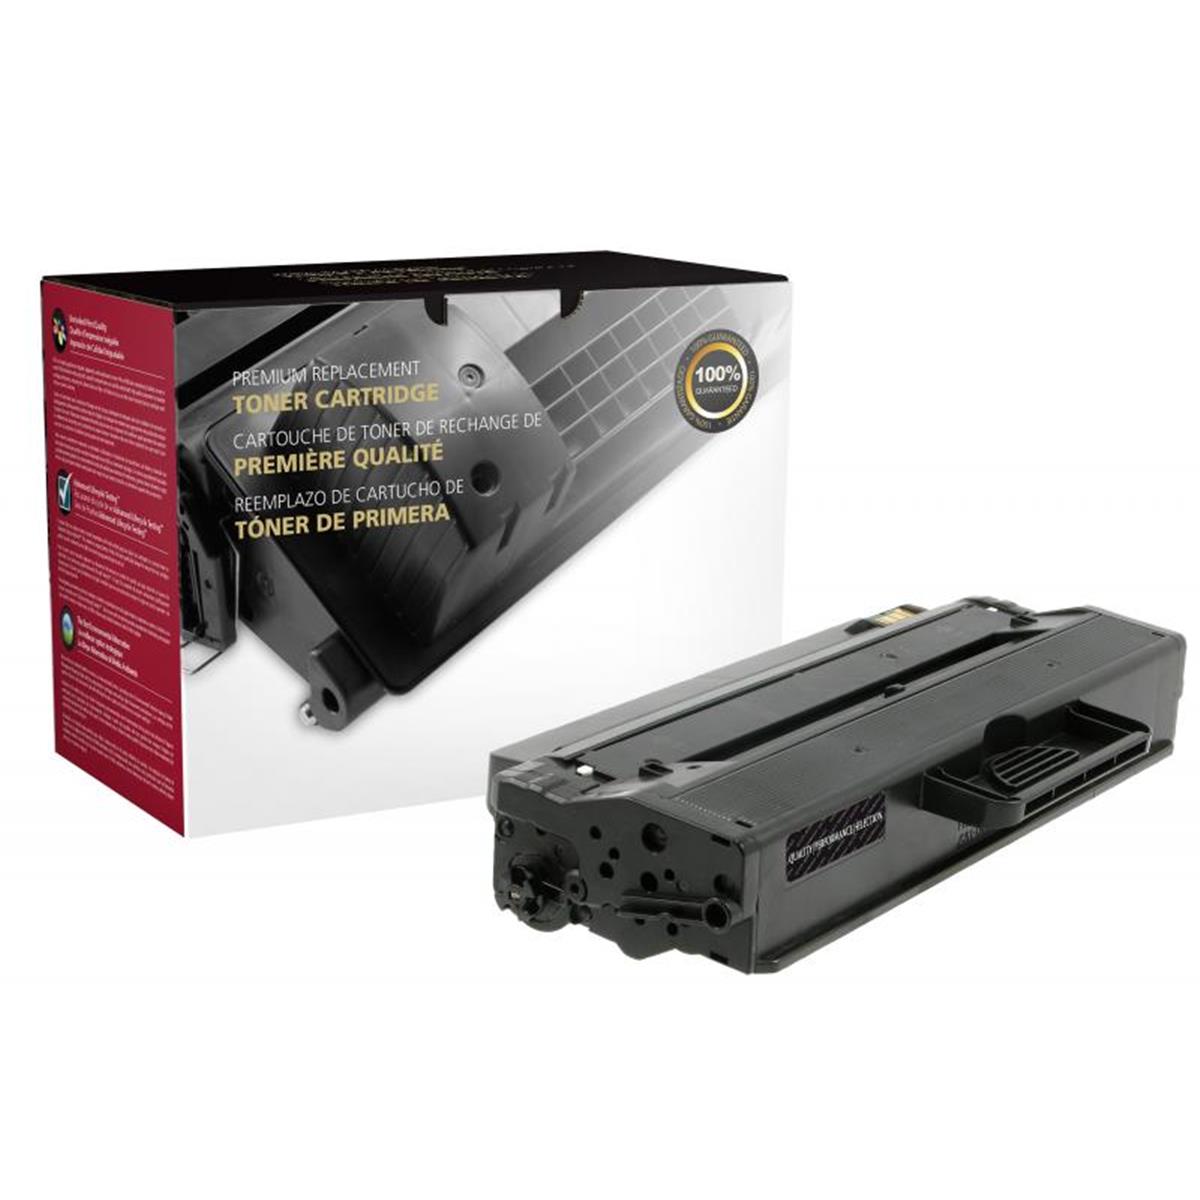 Picture of Dell 200631 High Yield Toner Cartridge for Dell B1260 & B1265